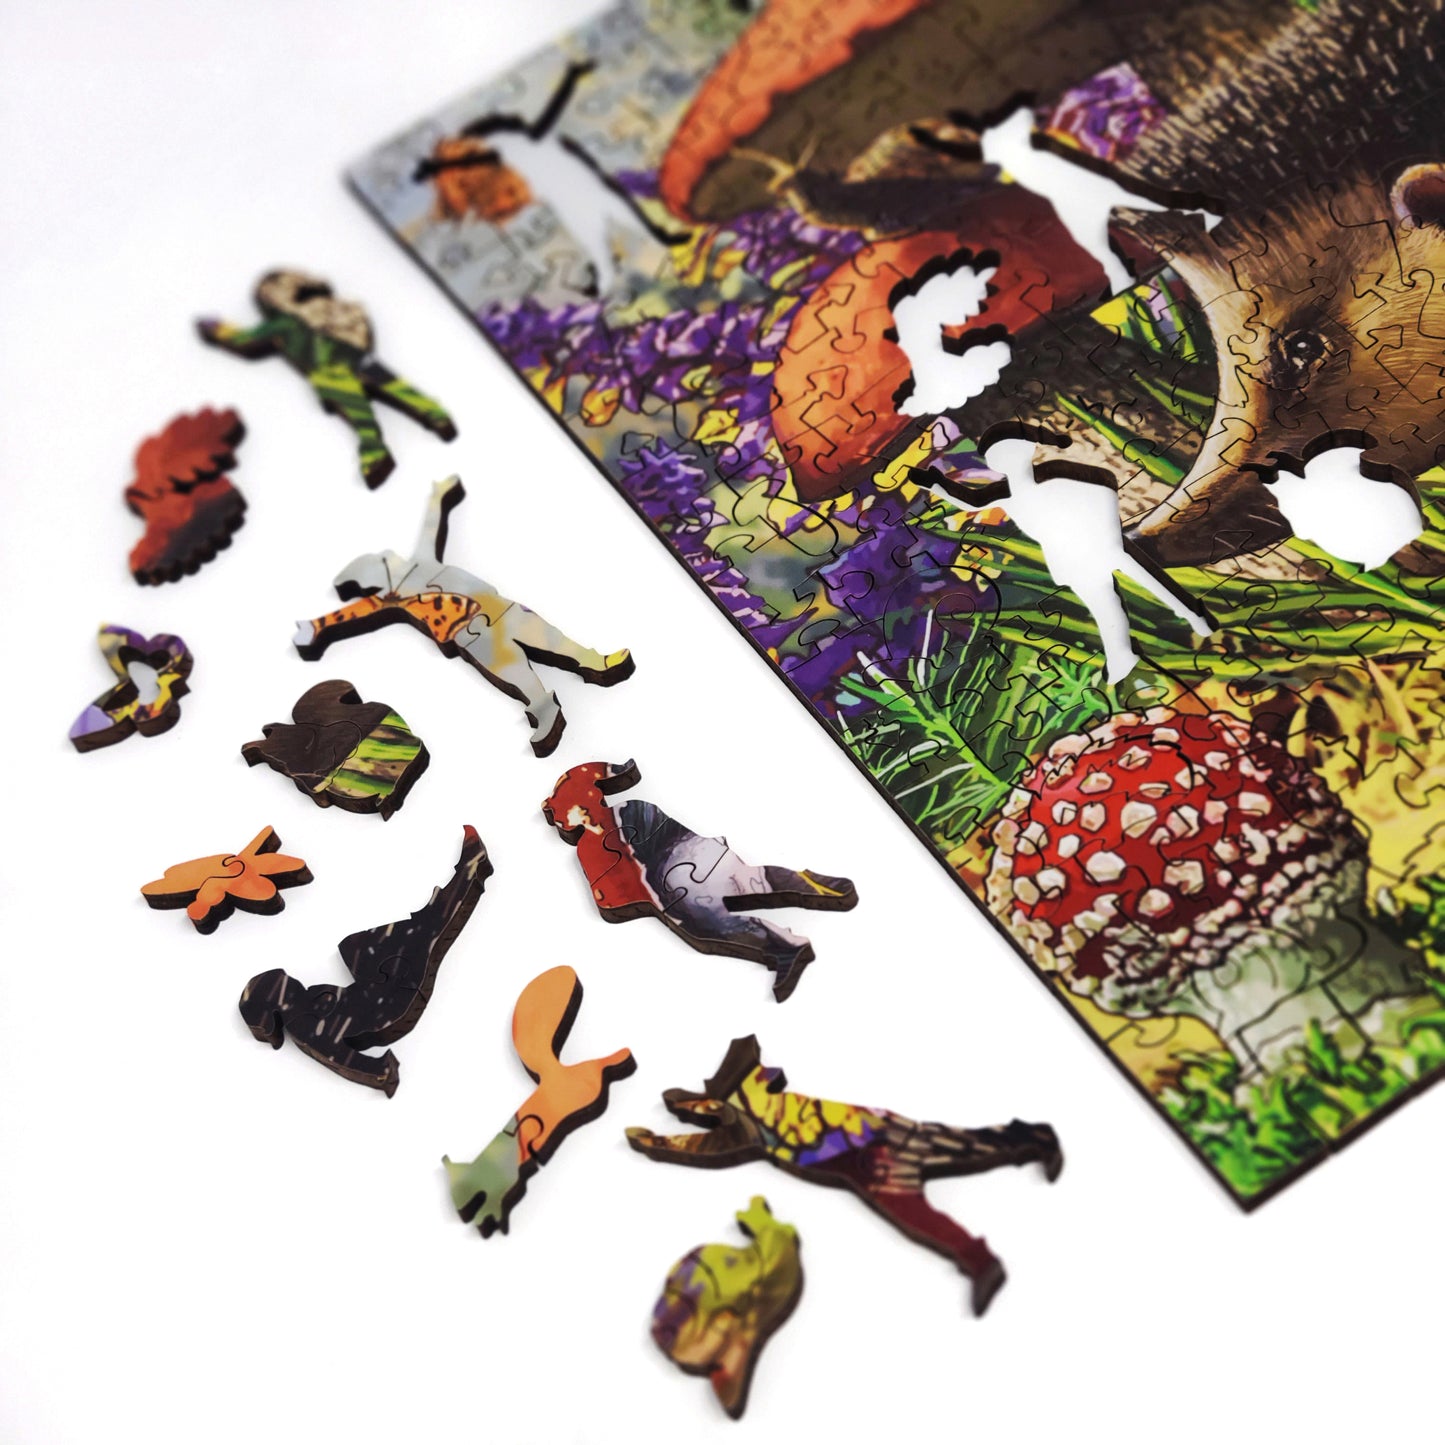 Wooden Jigsaw Puzzle with Uniquely Shaped Pieces for Adults - 487 Pieces - Majestic Harvest